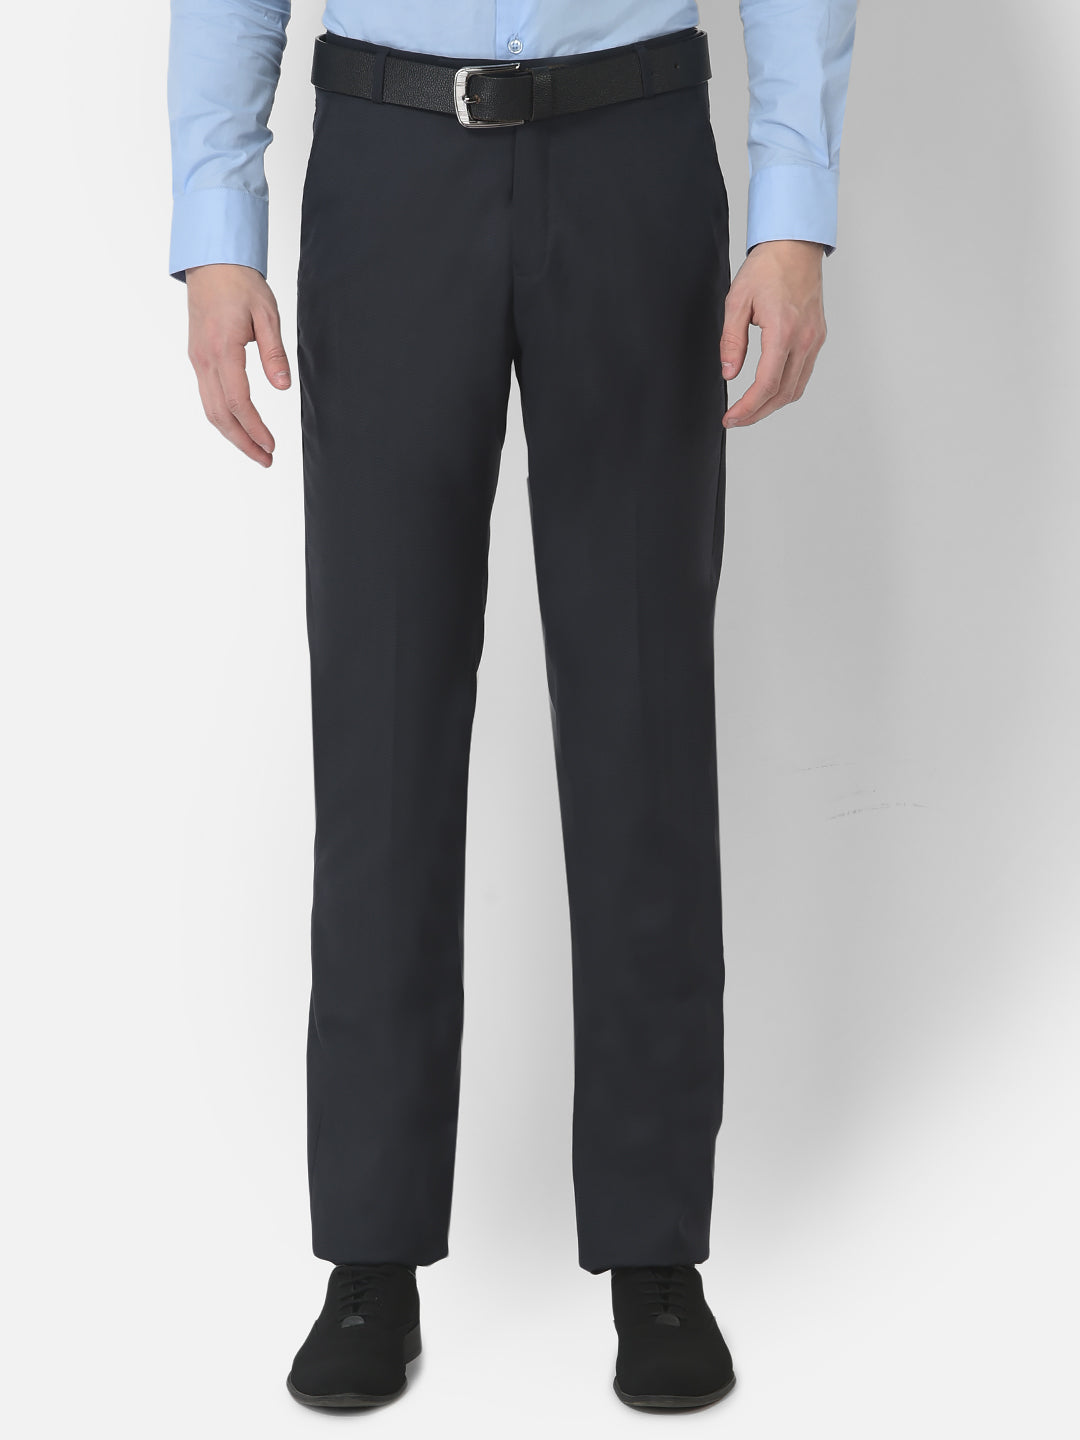 Cobb Navy Blue Ultra Fit Formal Trouser  Premium Quality Fabric  Perfect  Fit